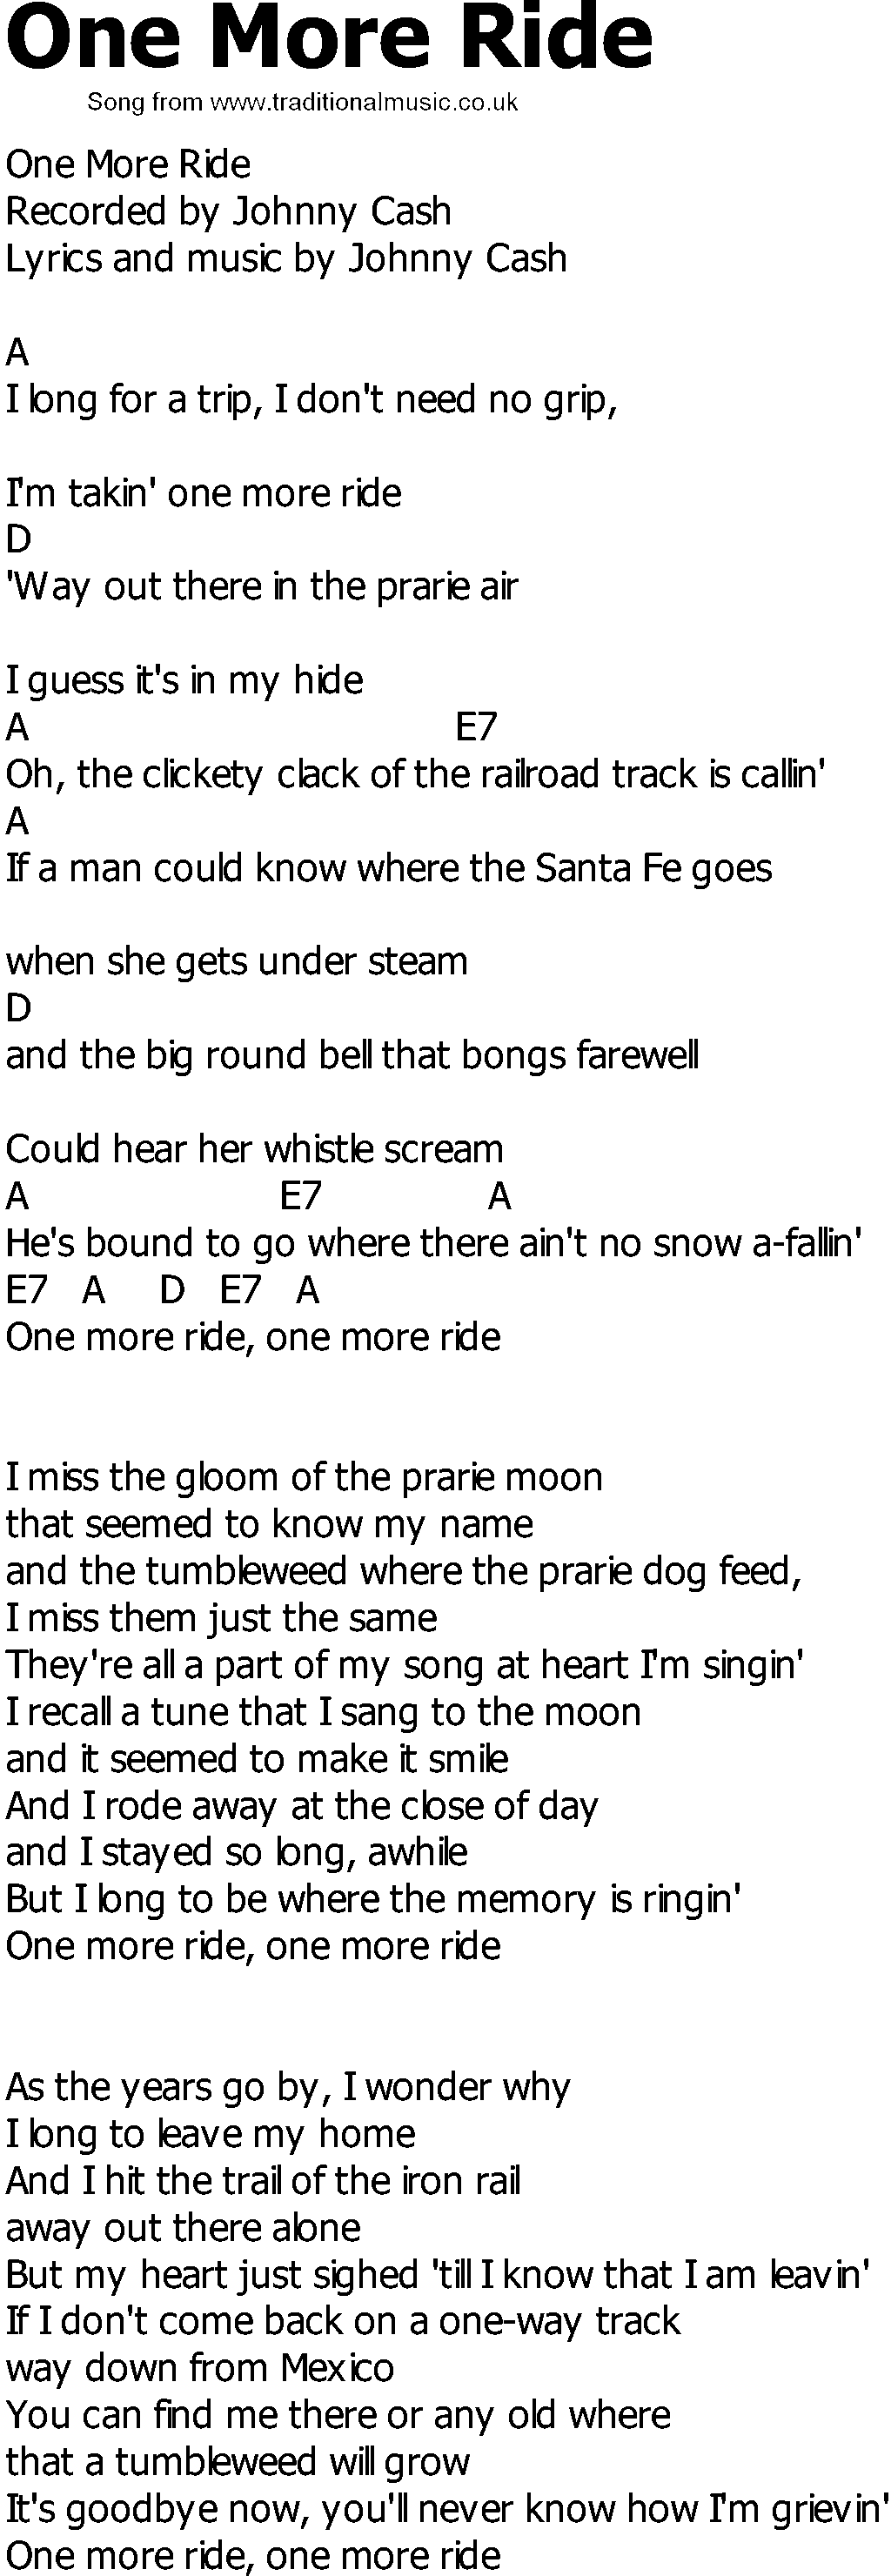 Old Country song lyrics with chords - One More Ride